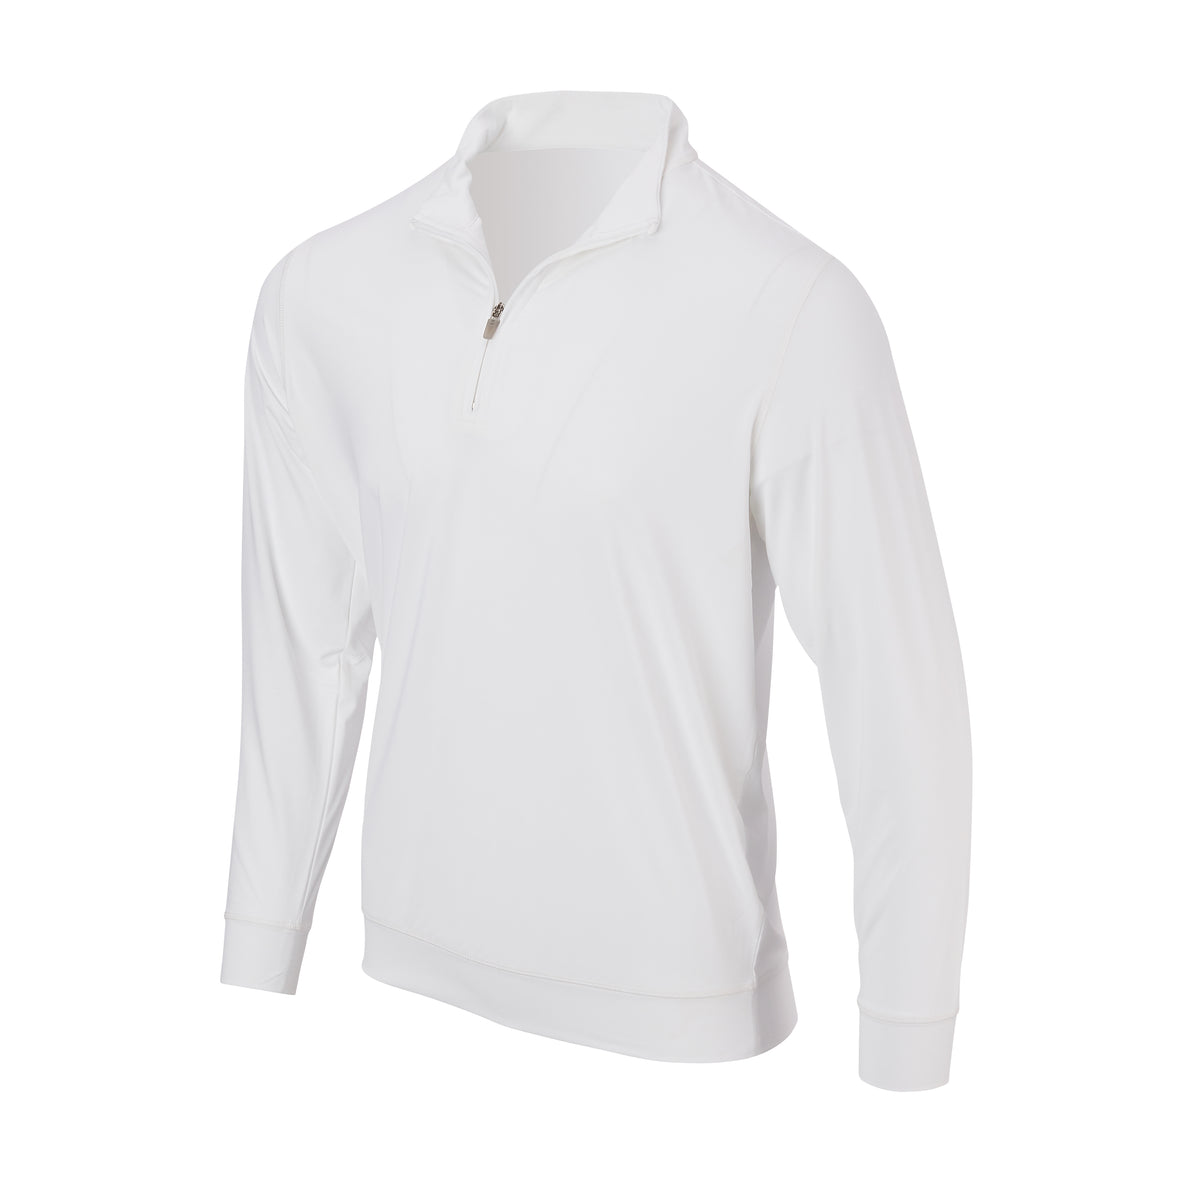 THE CLASSIC LONG SLEEVE HALF ZIP PULLOVER - White IS66006